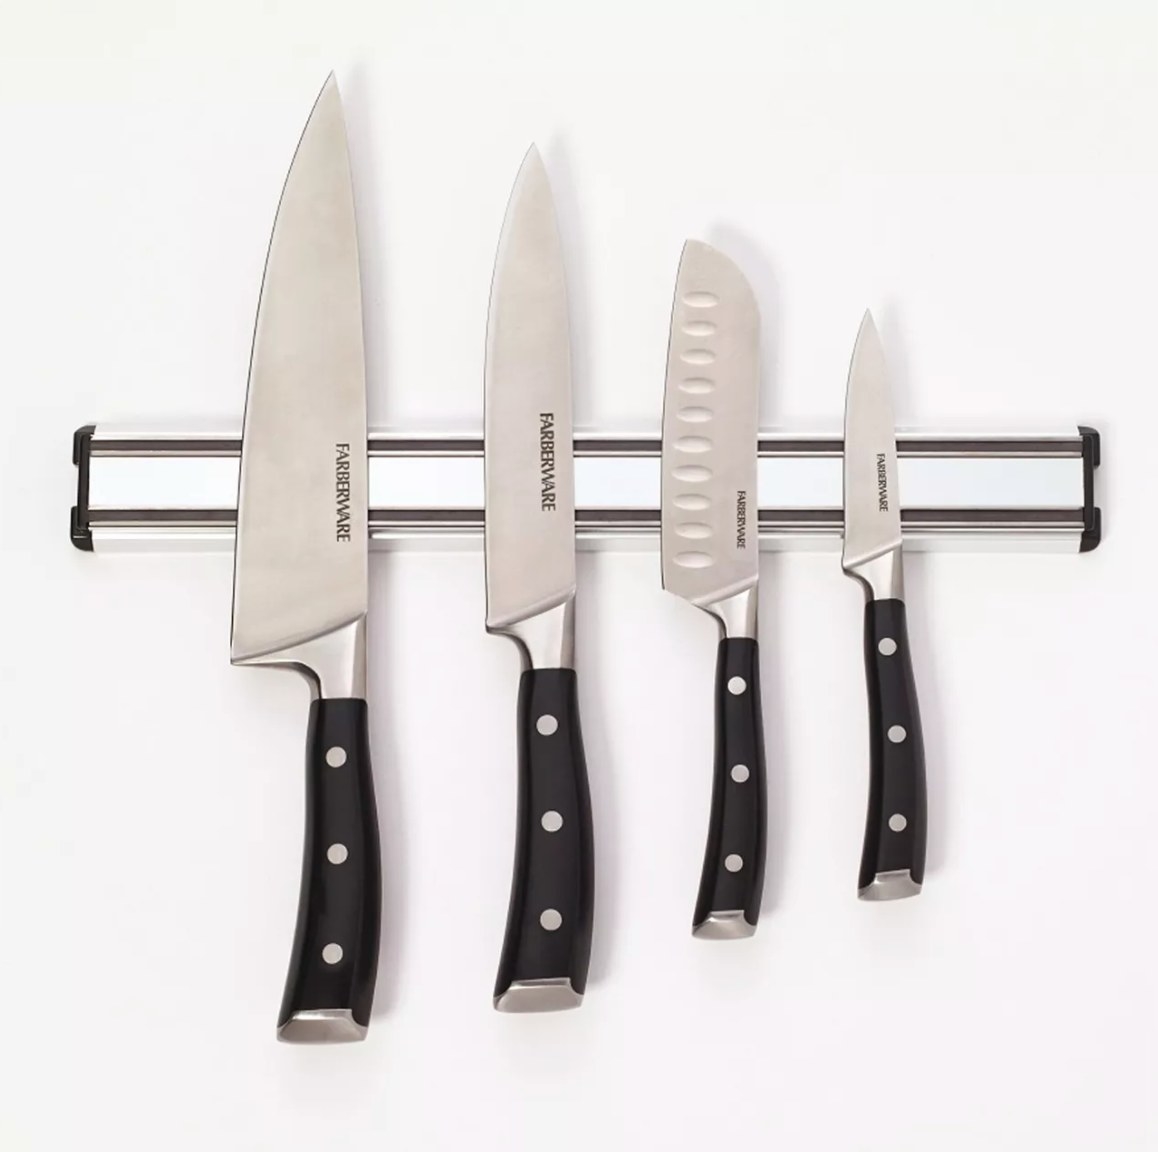 The magnetic knife holder holding a set of four knives with black handles